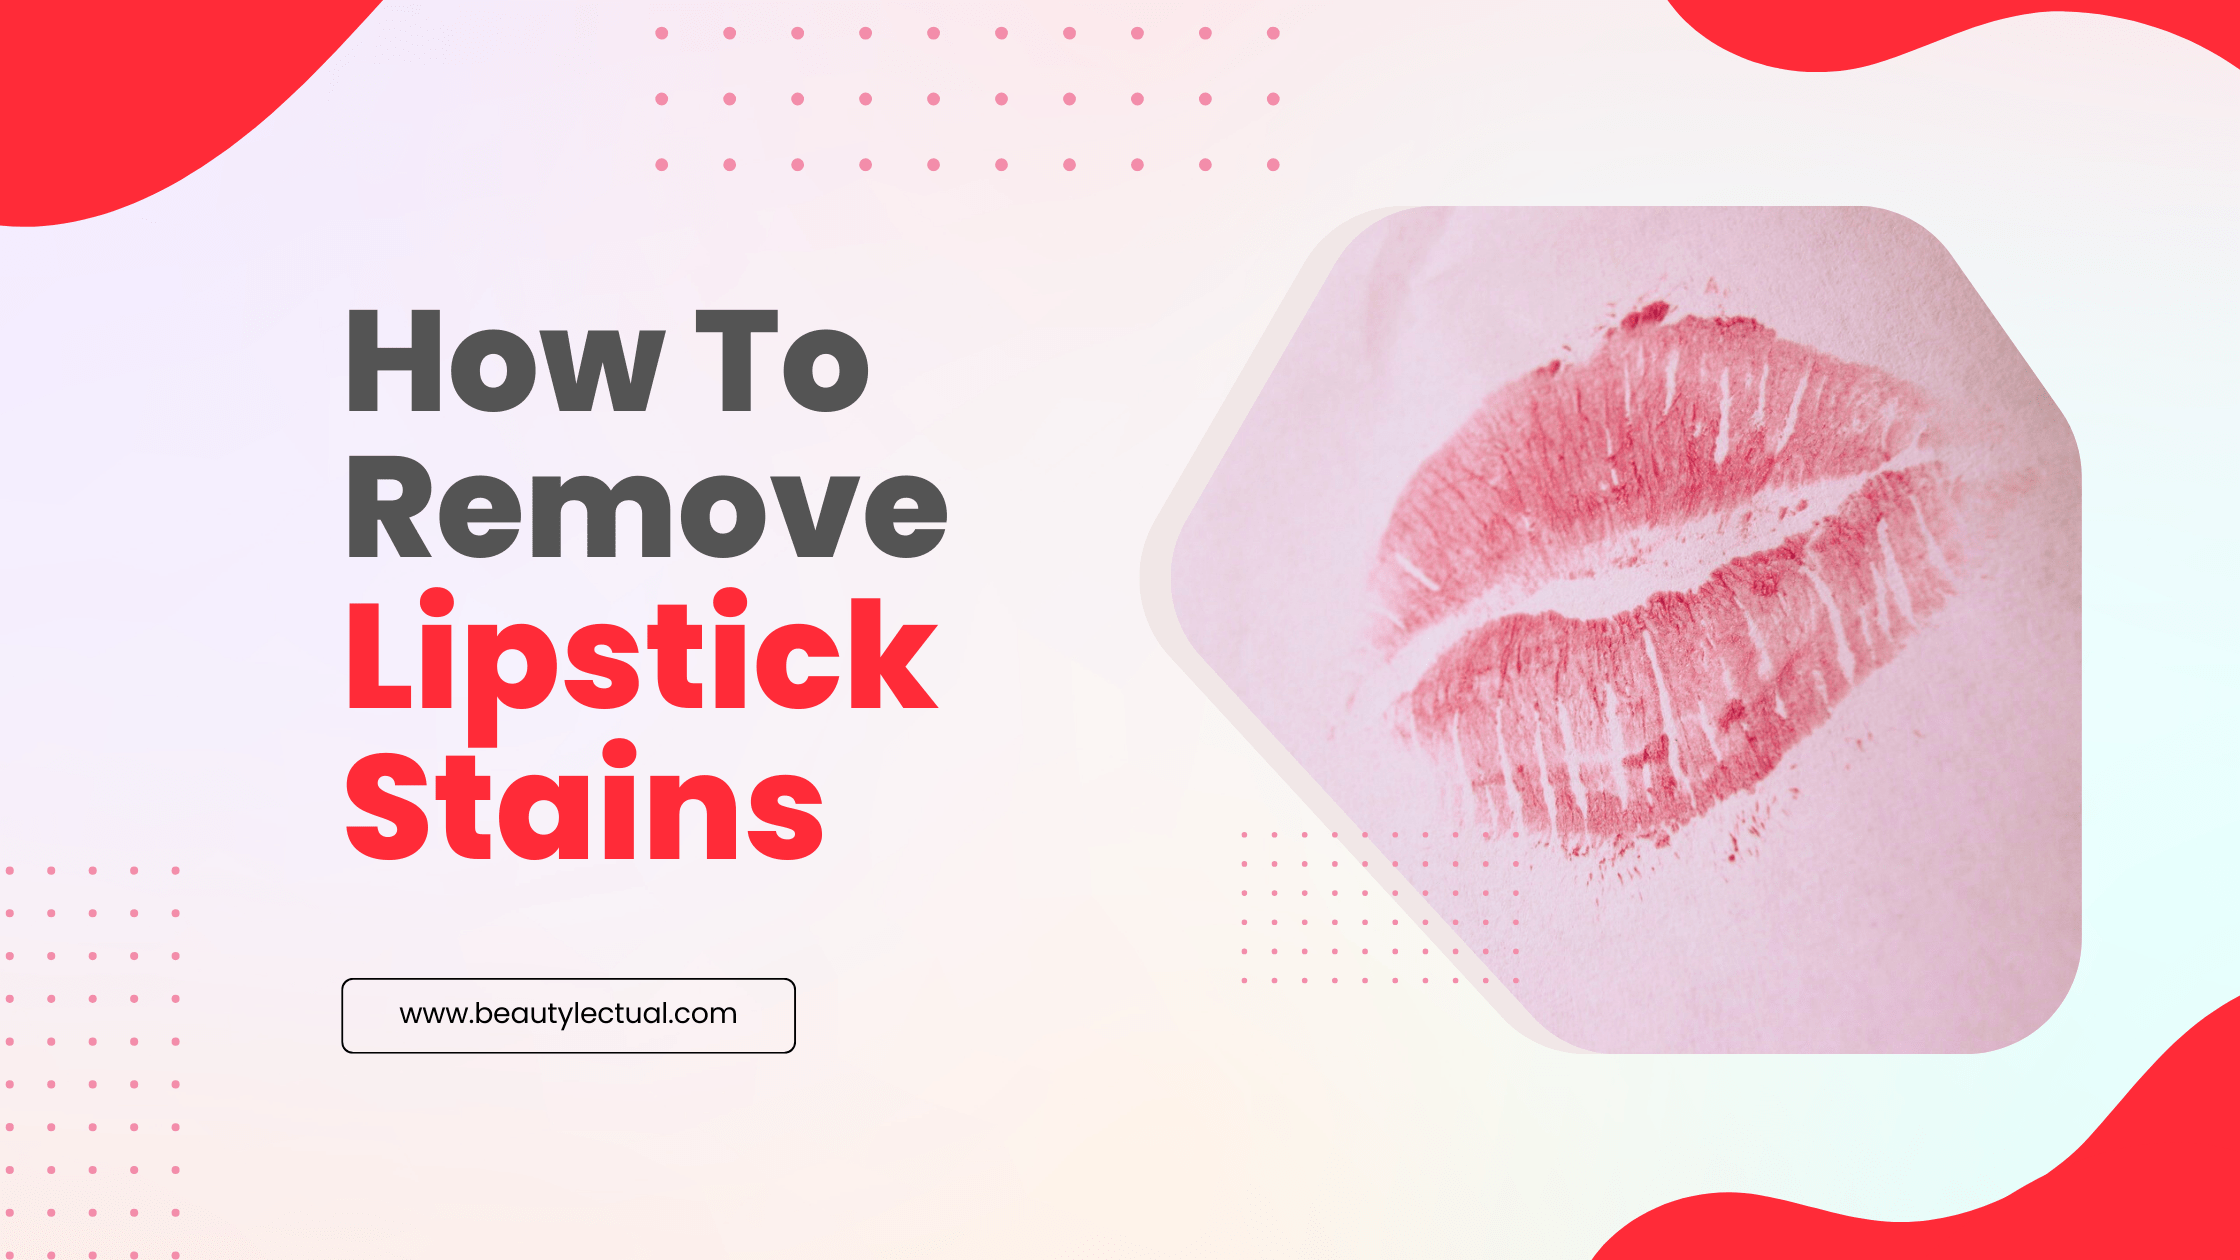 How To Remove Lipstick Stains